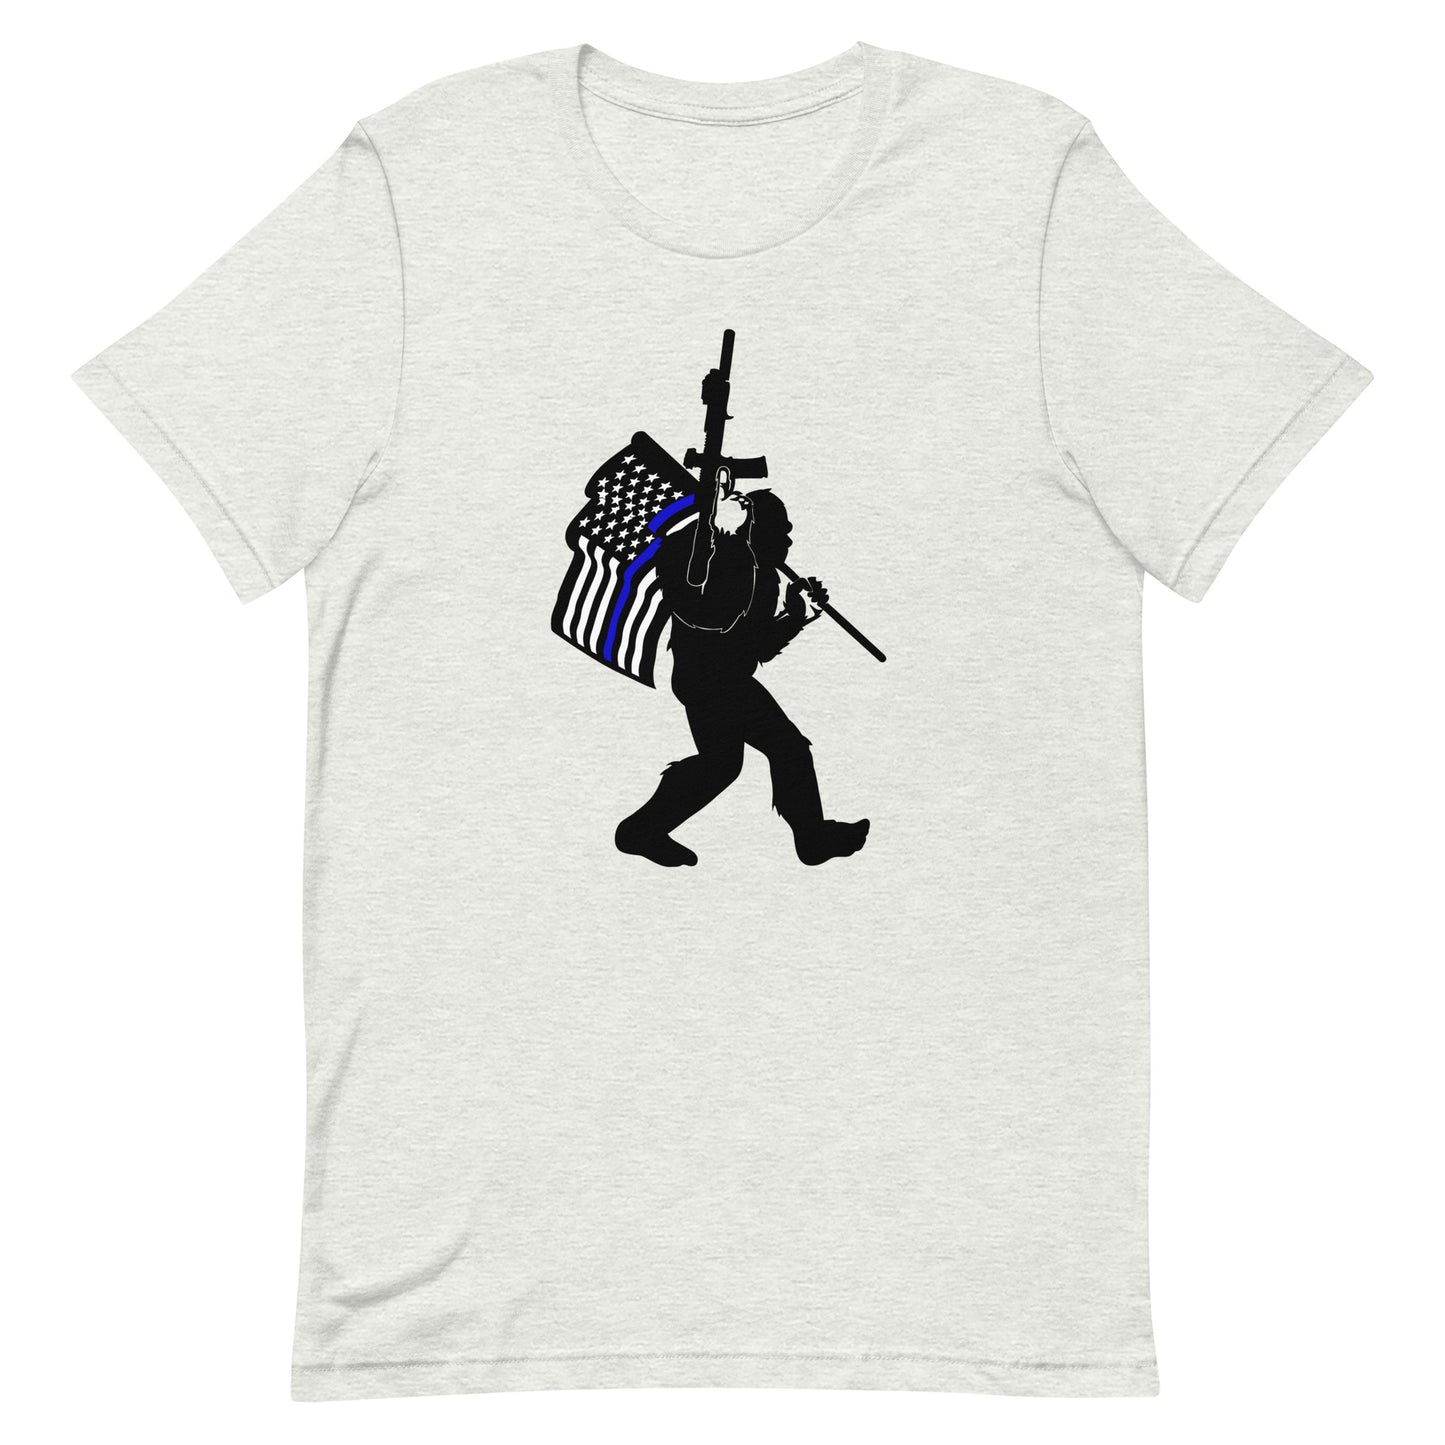 Thin Blue Line Tactical Bigfoot - Police - Unisex t-shirt